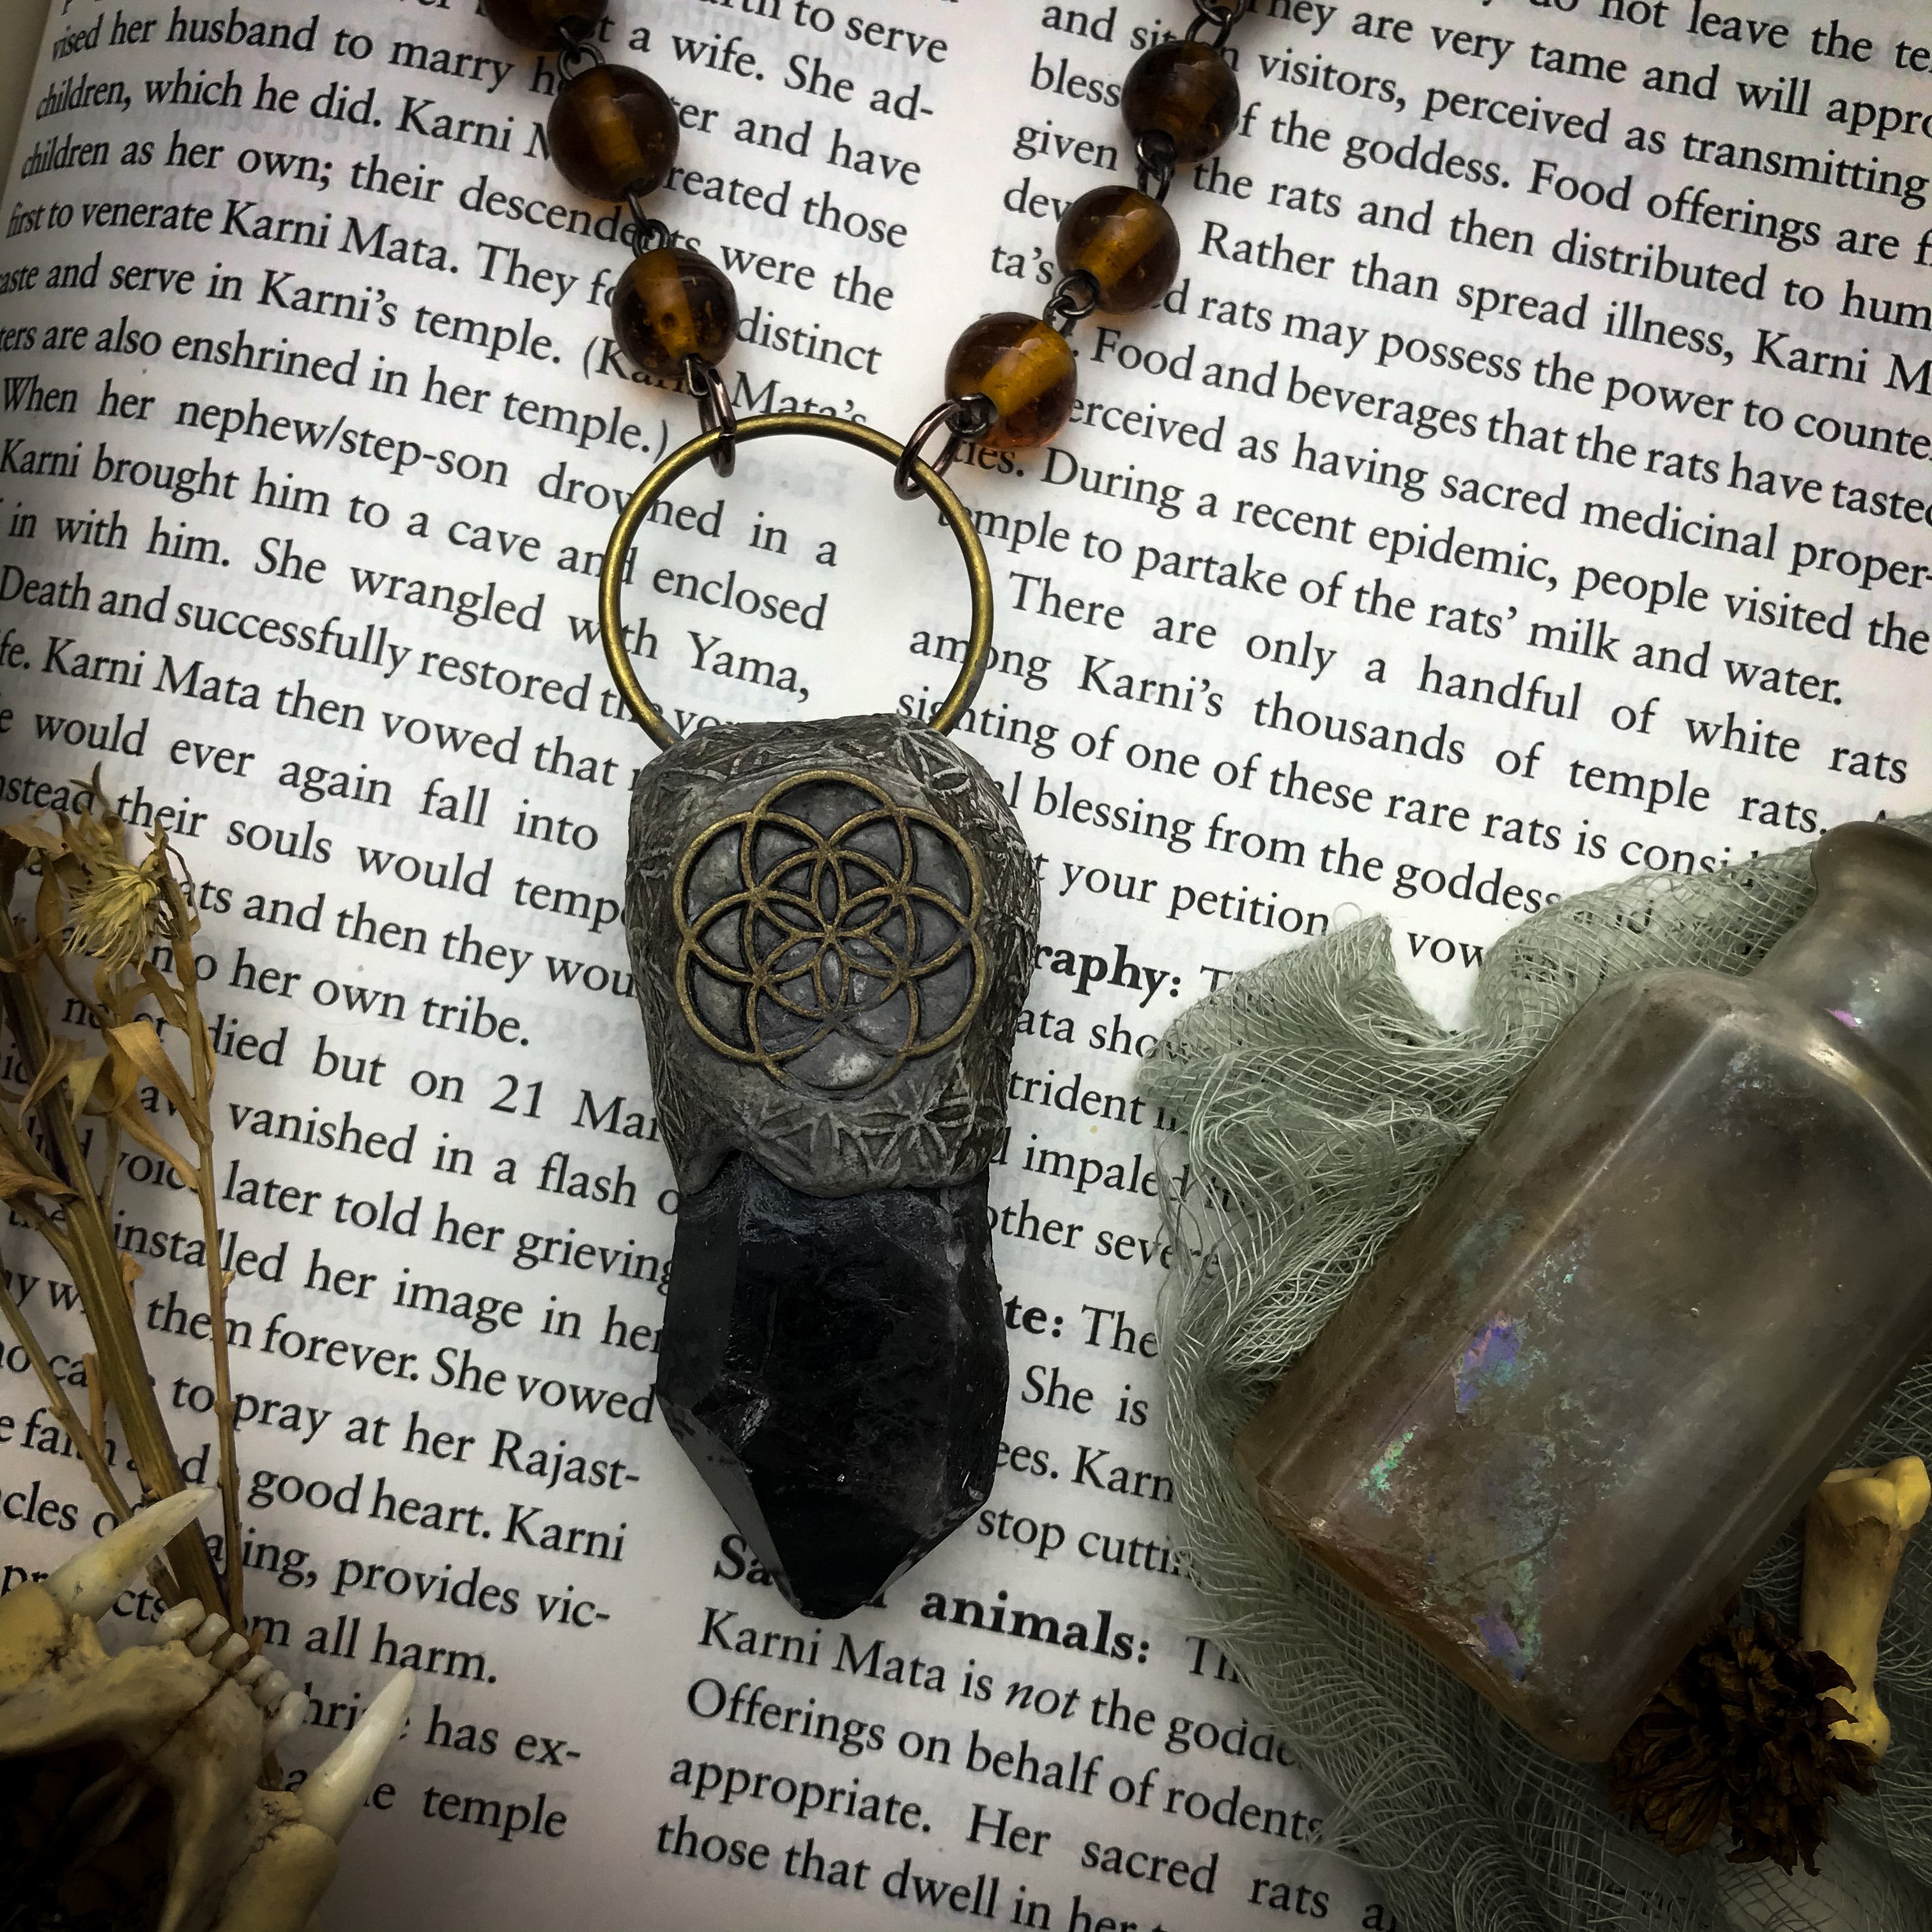 Seed of Life Necklace with Smoky Quartz for Cosmic Consciousness